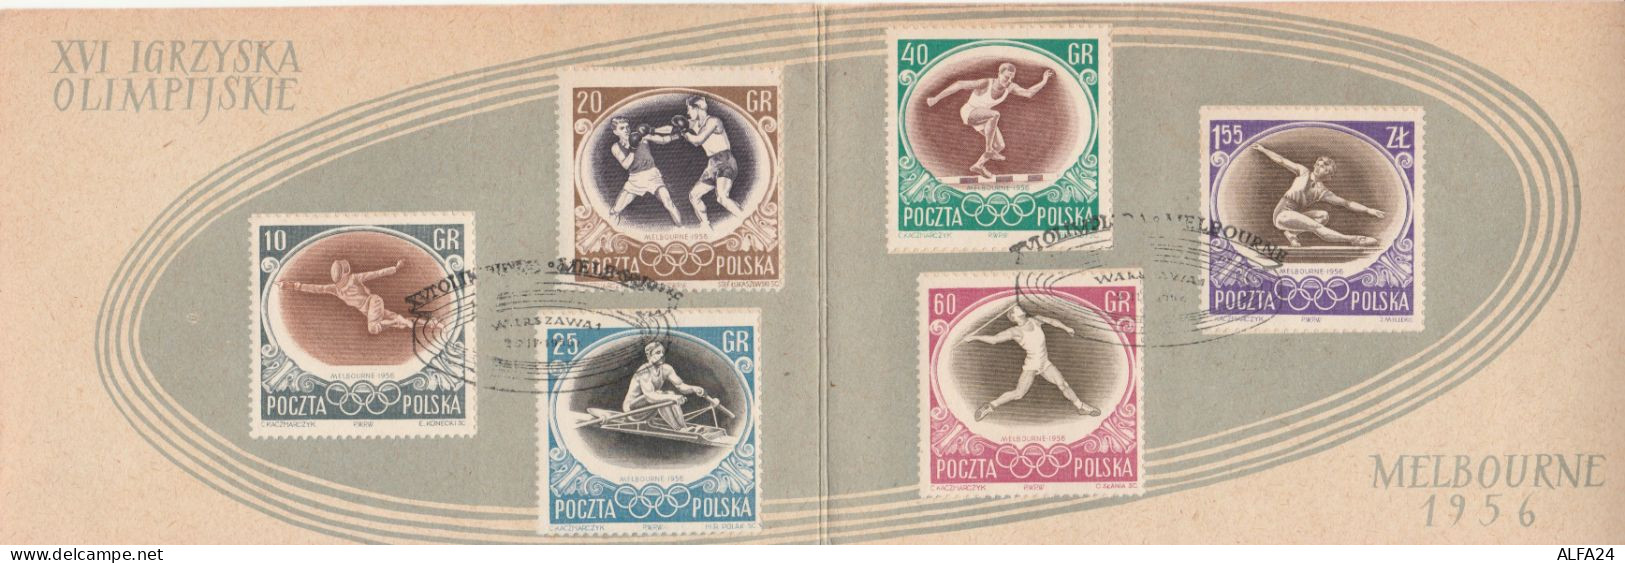 LIBRETTO SERIE POLONIA 1956  MELBOURNE 1956 OLIMPIADI (TY2270 - Covers & Documents